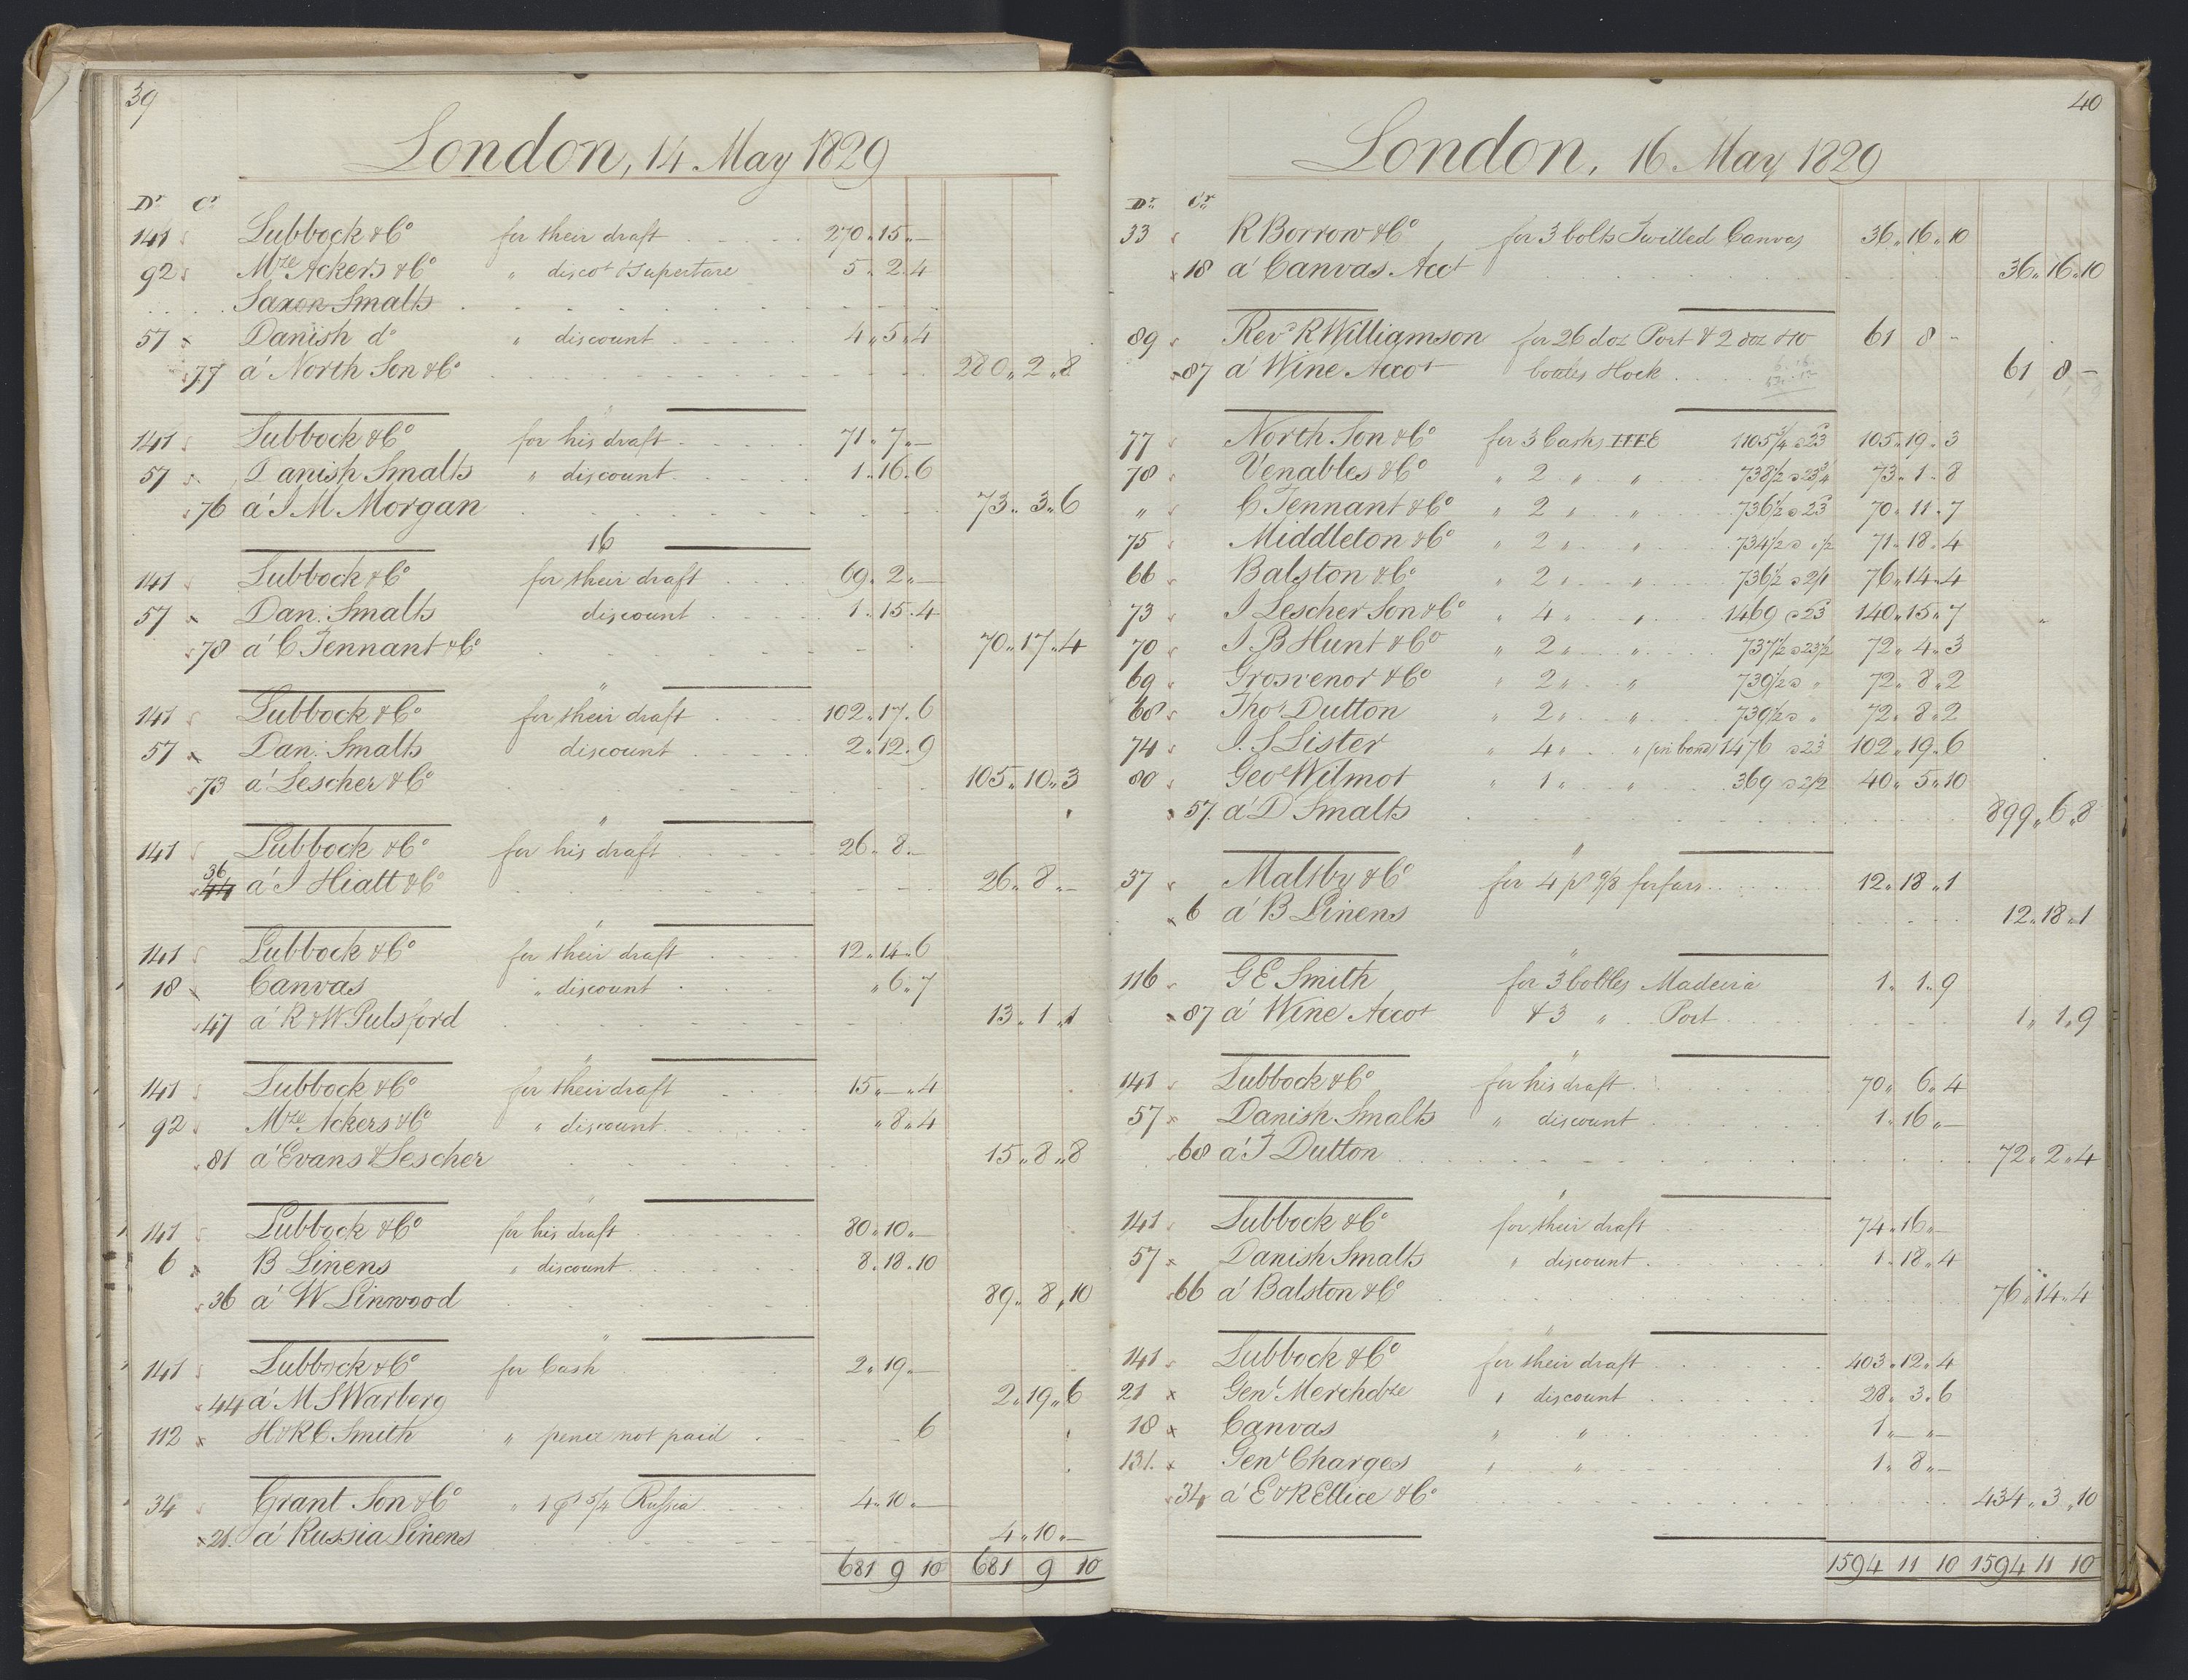 Smith, Goodhall & Reeves, RA/PA-0586/R/L0001: Dagbok (Daybook) A, 1829-1831, p. 39-40